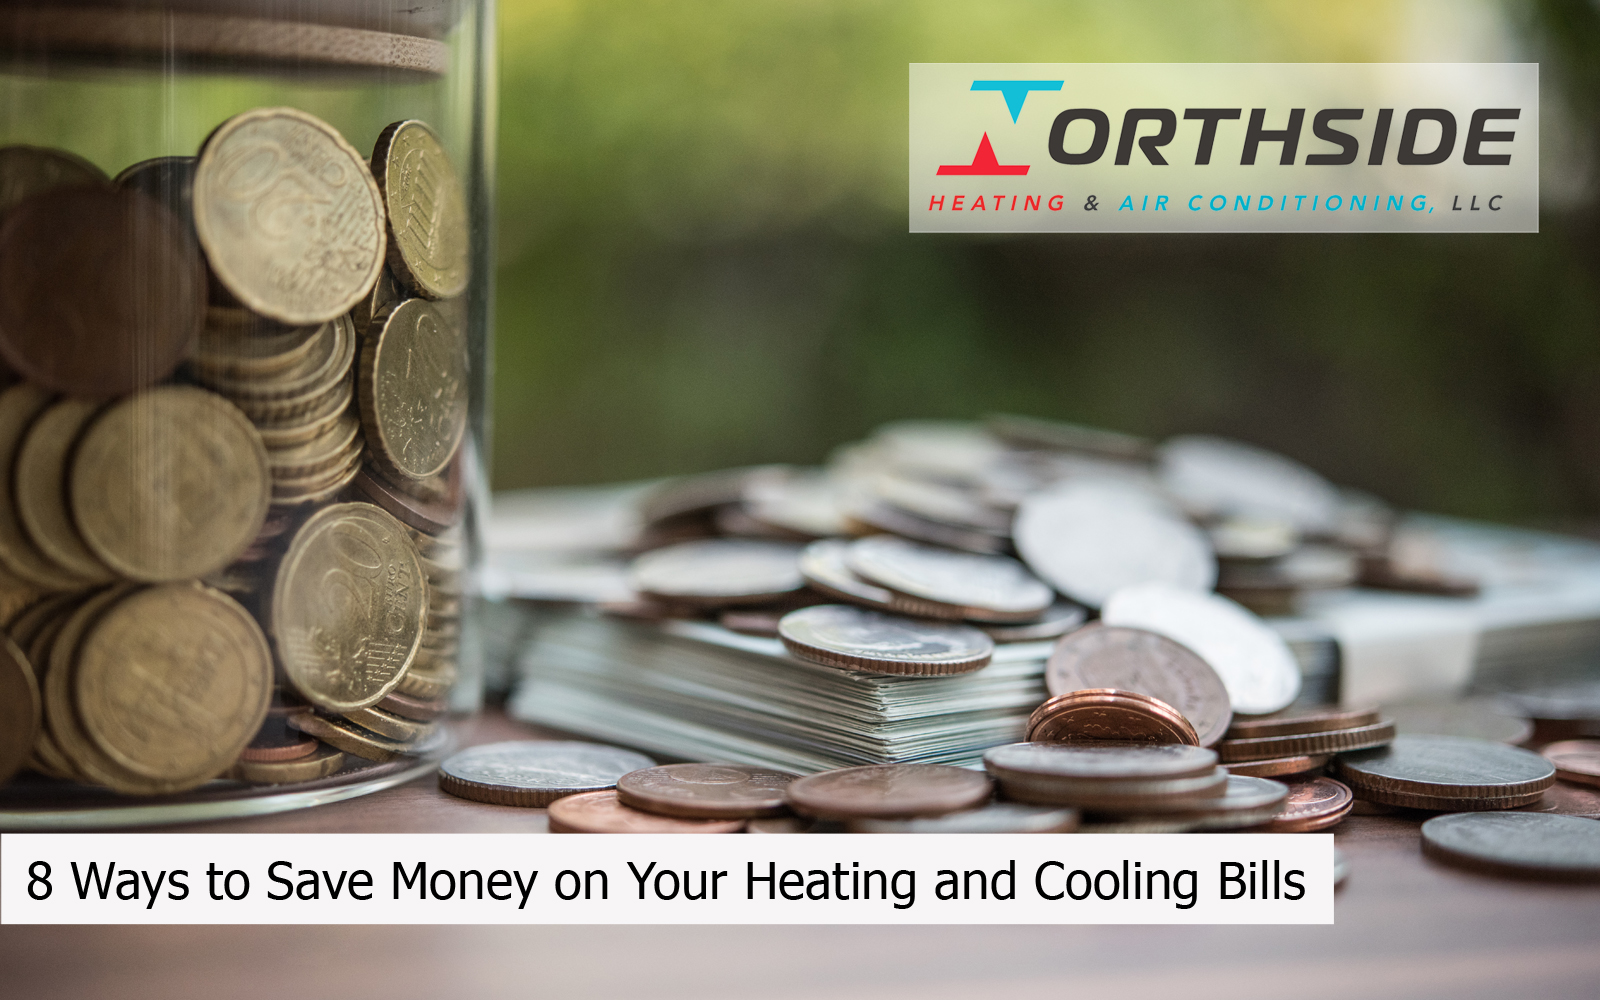 8 Ways to Save Money on Your Heating and Cooling Bills